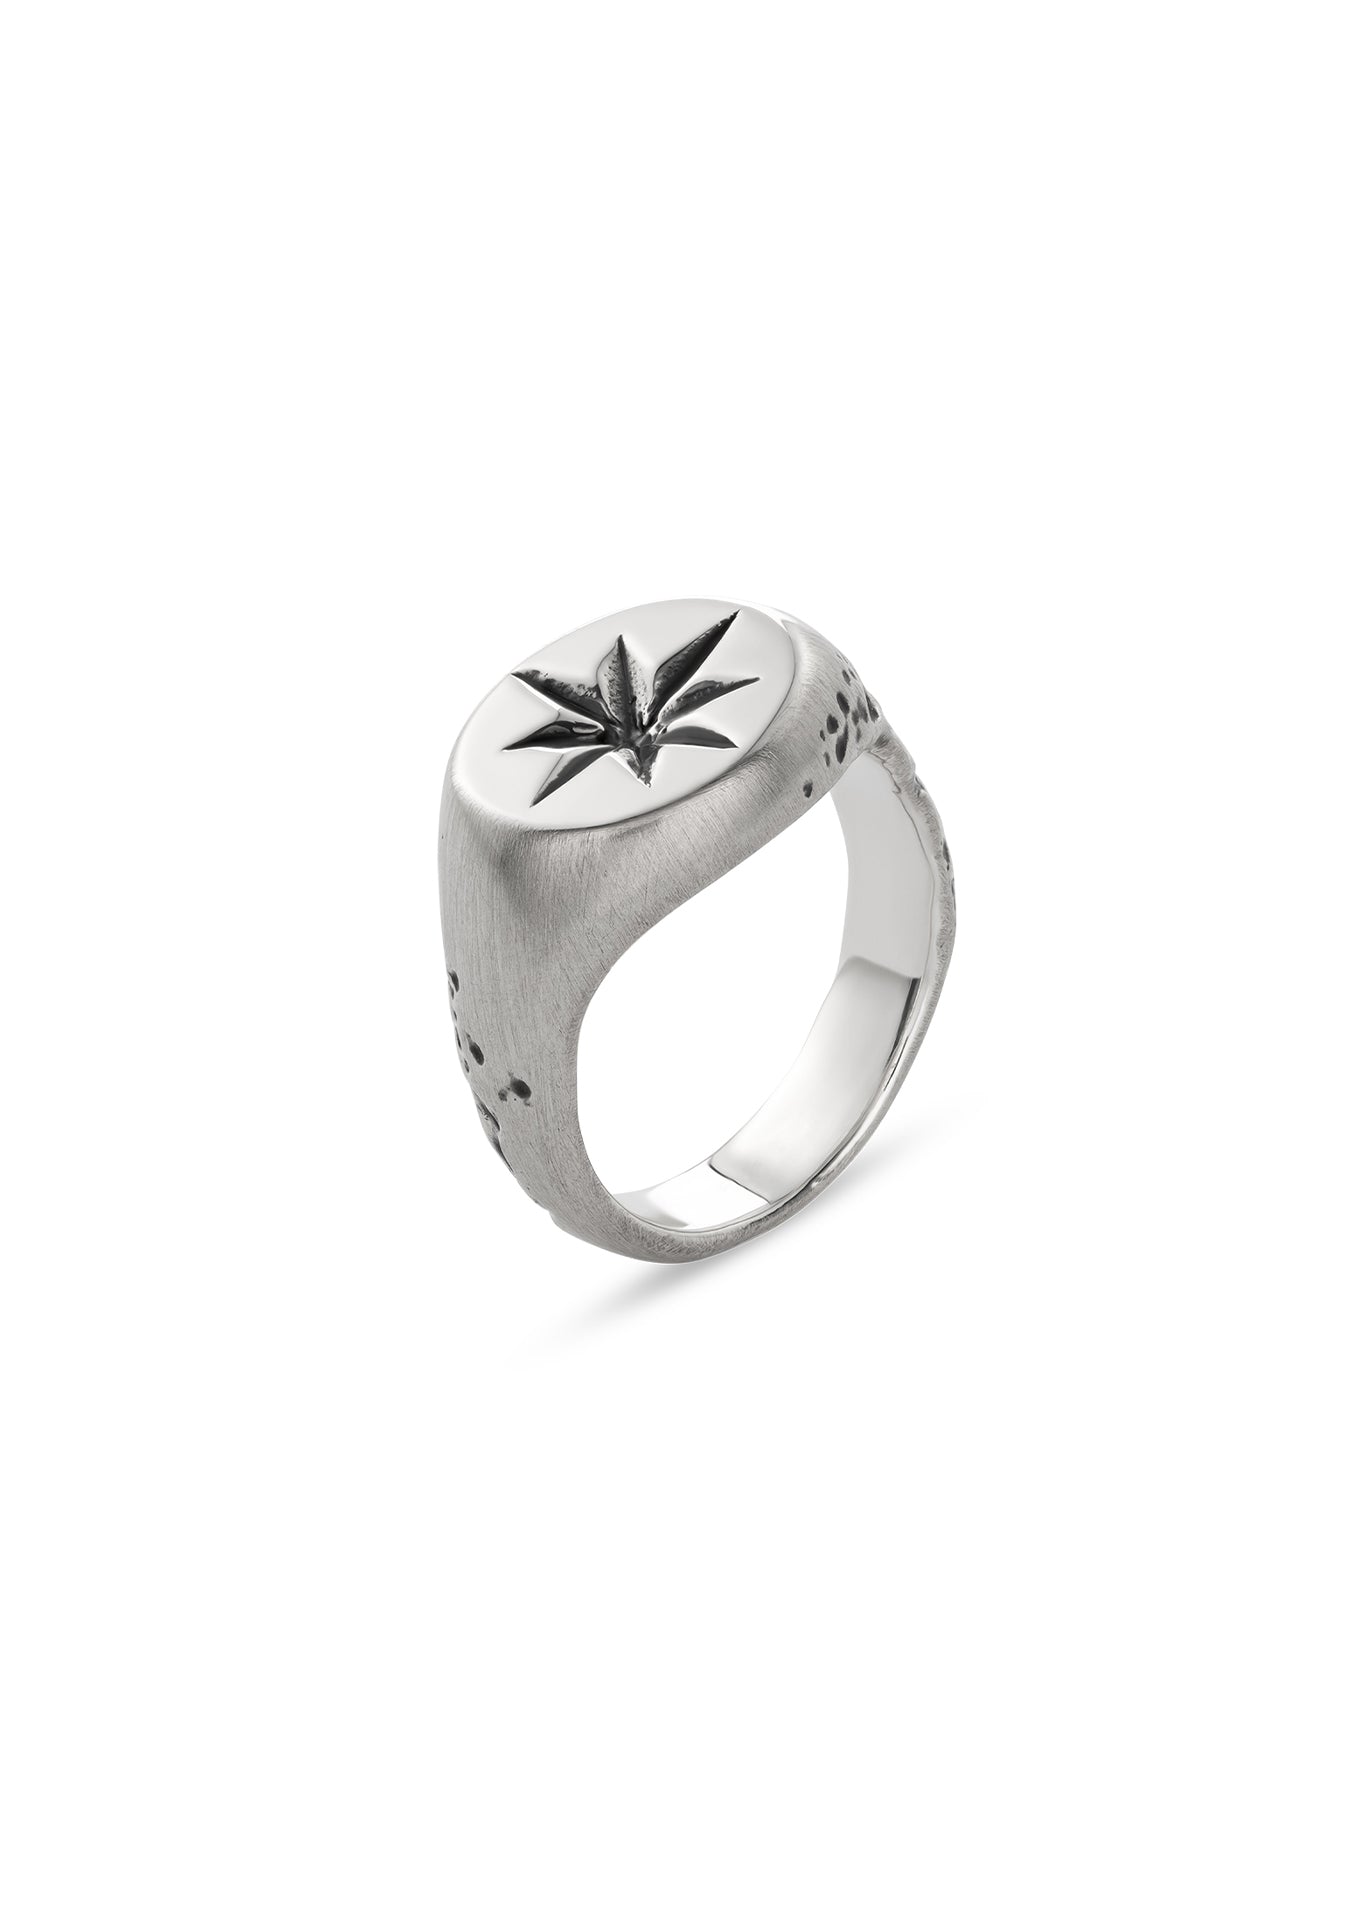 Star Signet Ring Silver - NO MORE ACCESSORIES